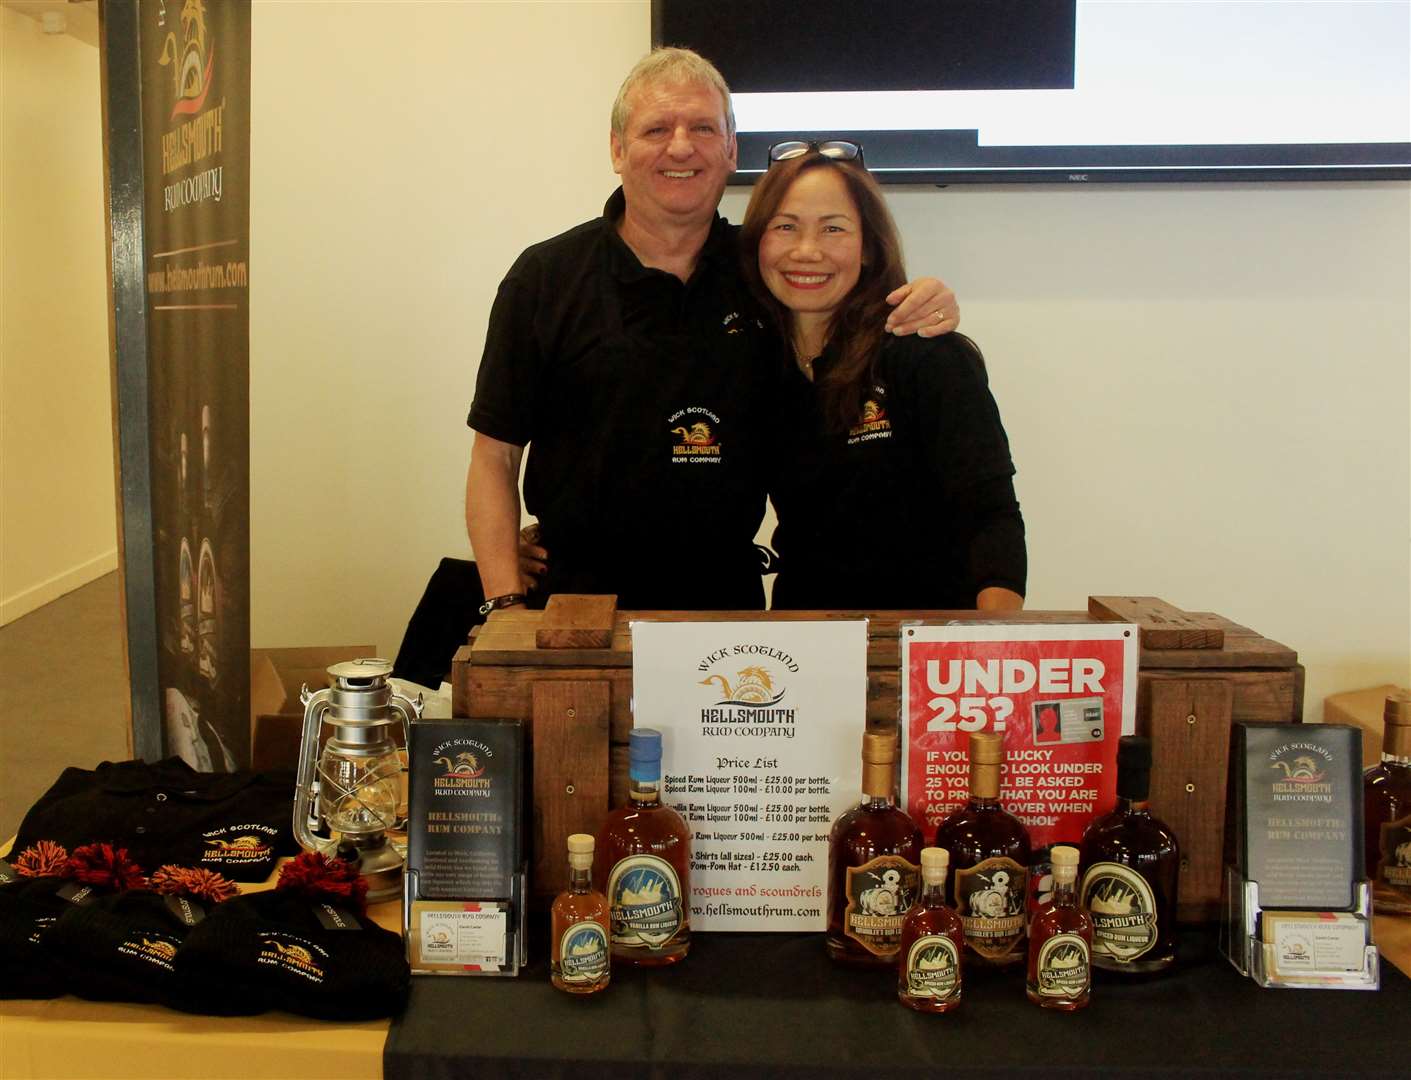 David and Cheryl Carter at the Hellsmouth Rum Company stand. Picture: Alan Hendry